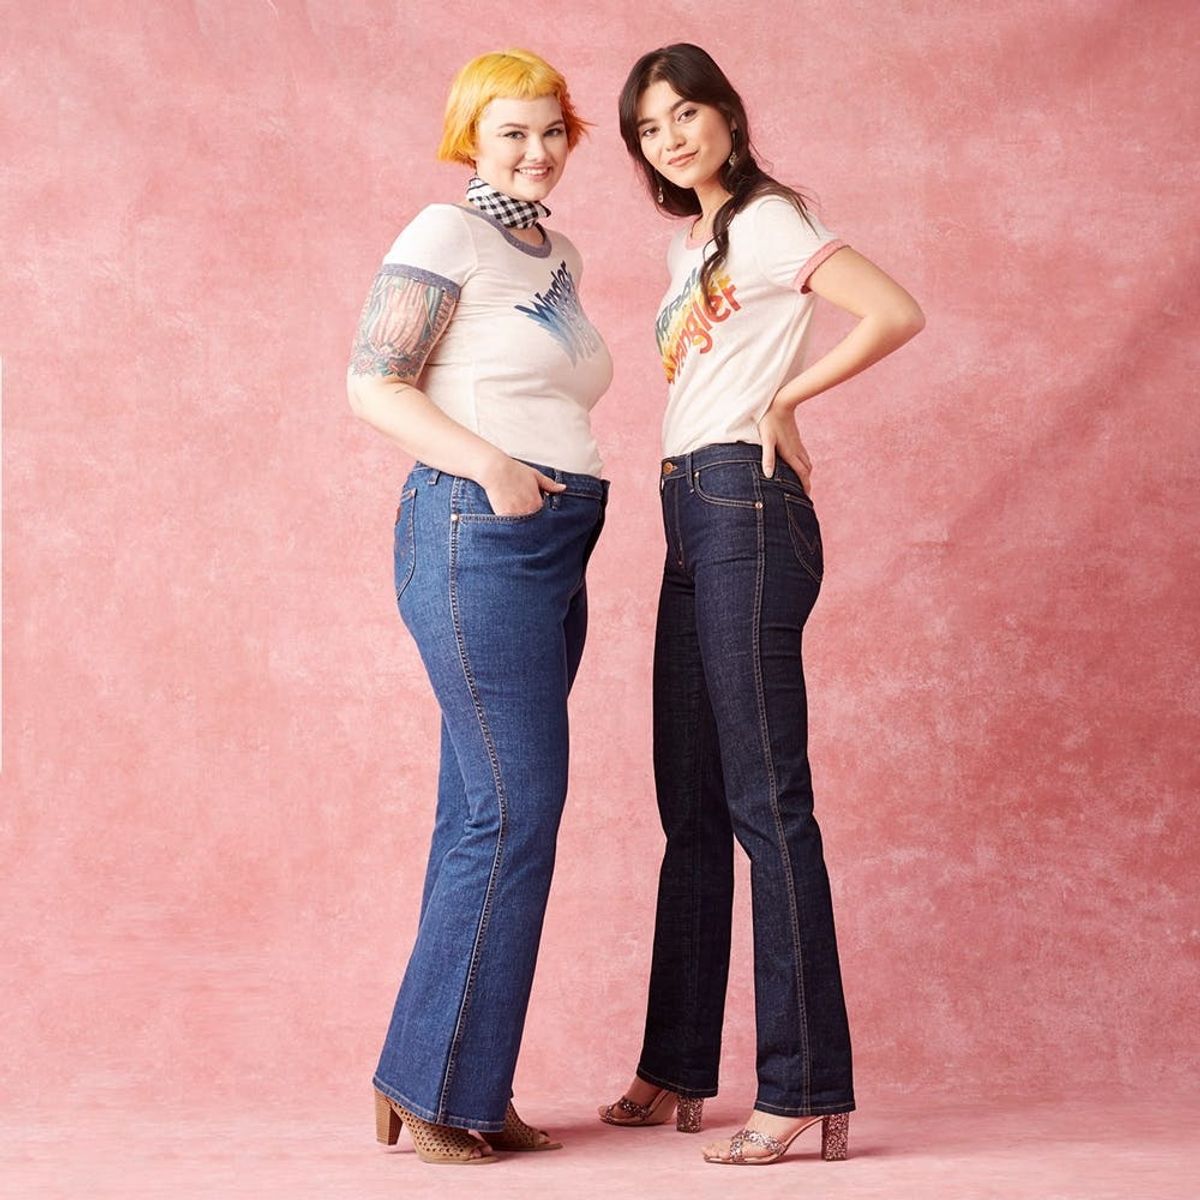 ModCloth x Wrangler’s Capsule Collection Is an Absolute ’70s Dream